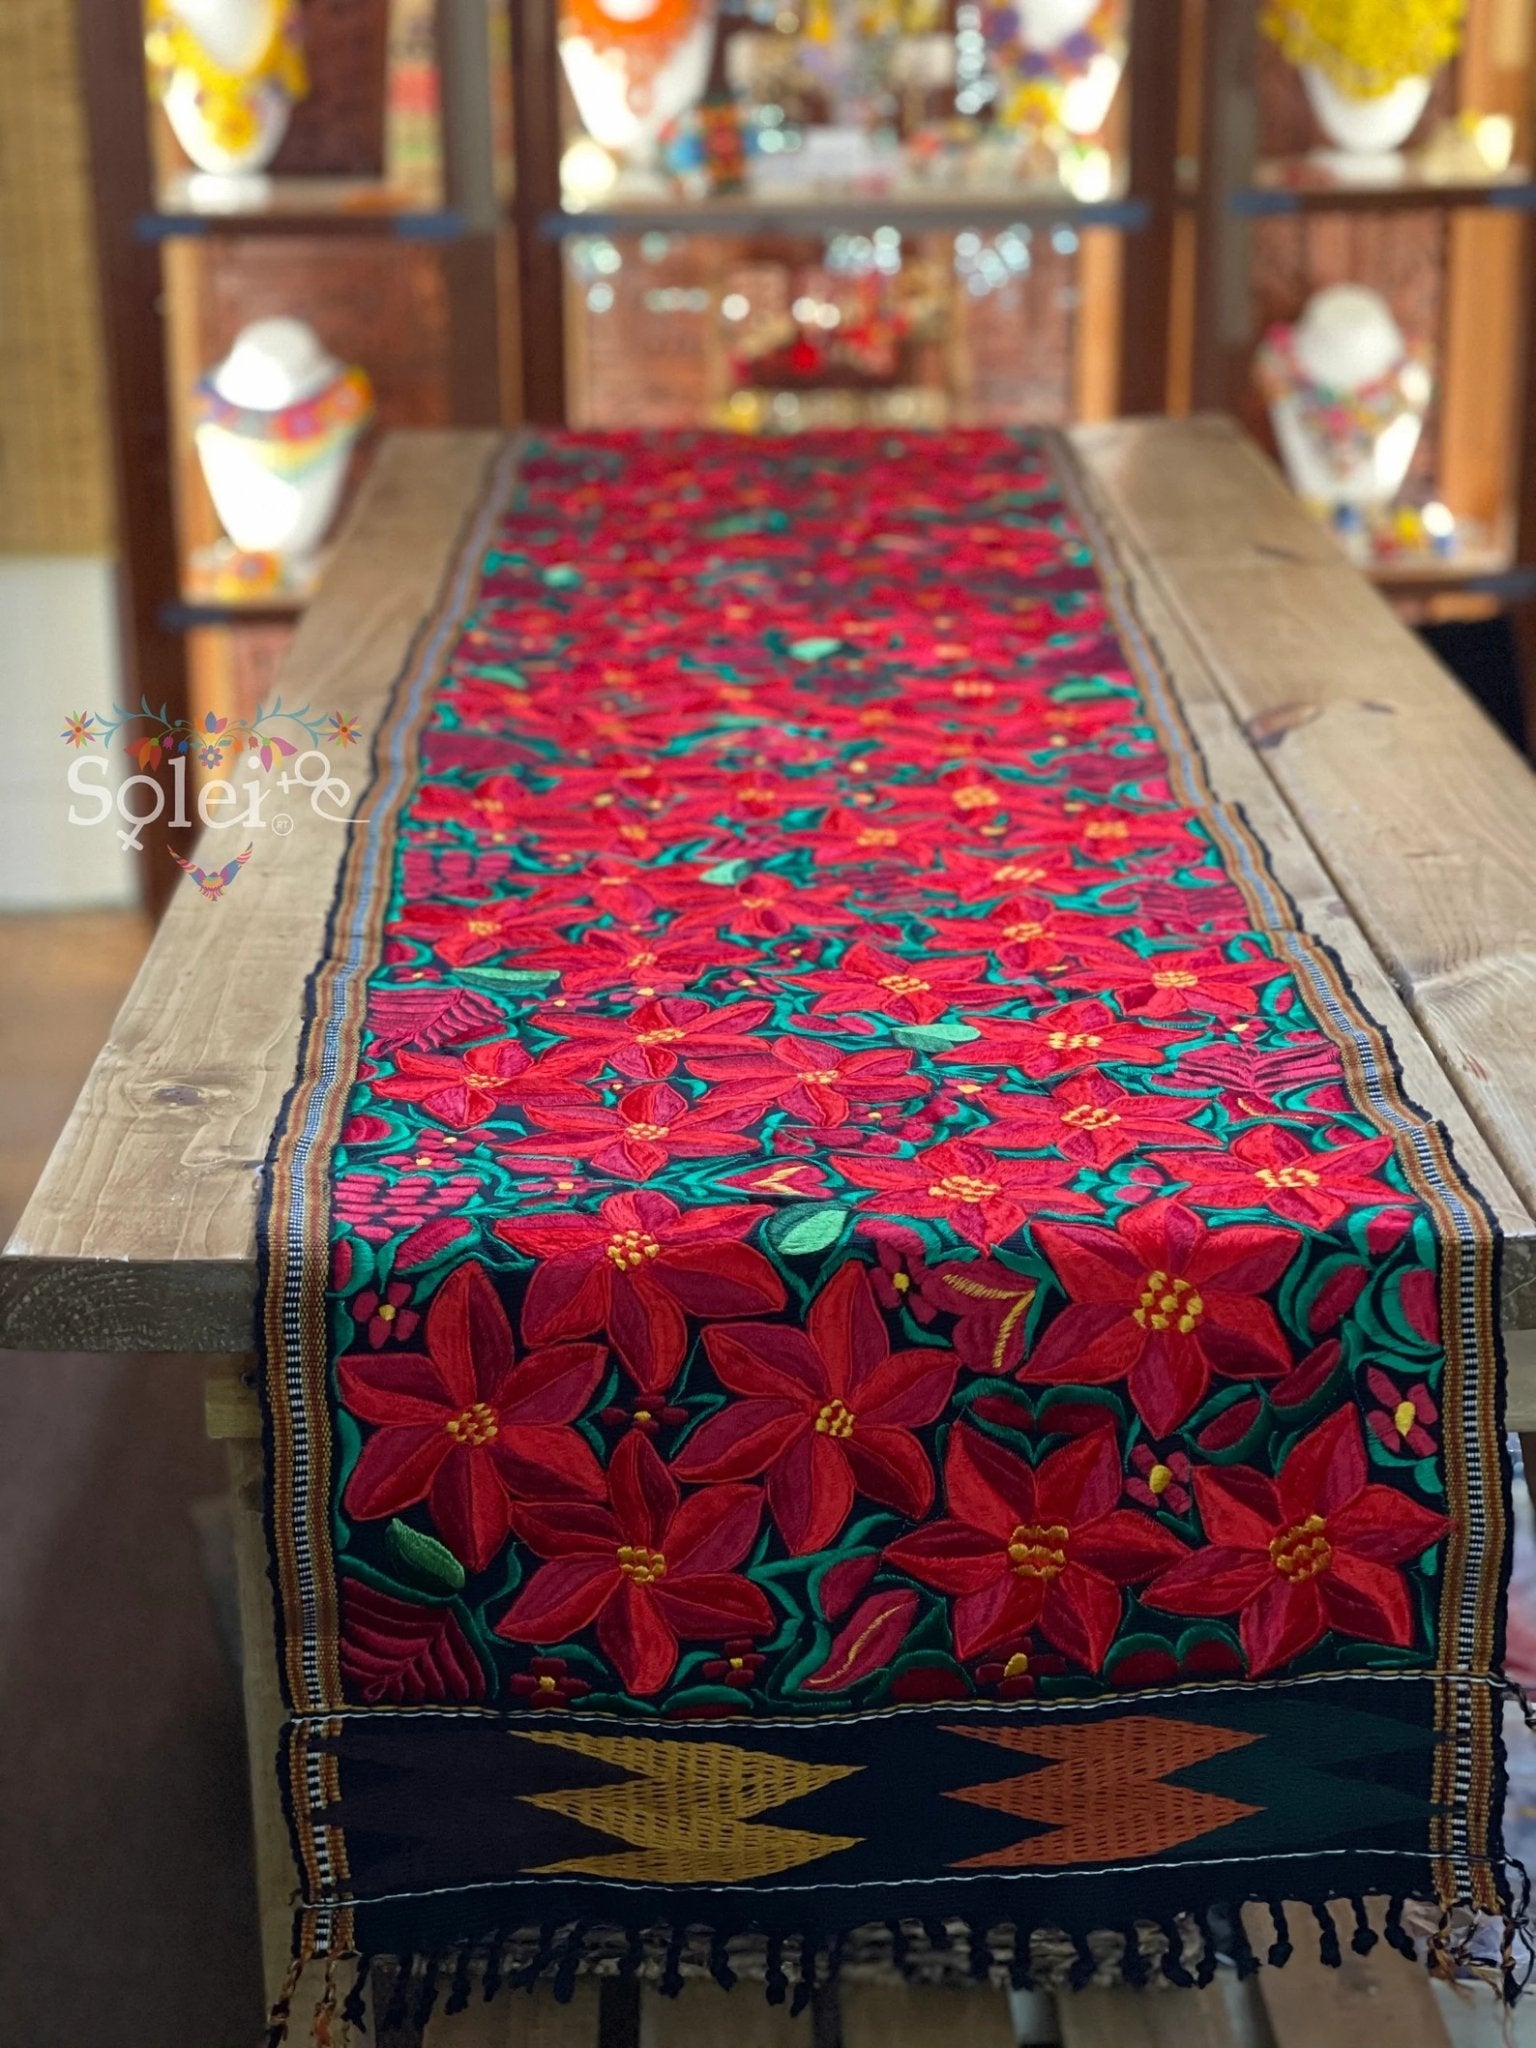 Mexican Handwoven Table Runner . Poinsettia Table Runner. Mexican Table Runner. Camino de Mesa Noche Buena. - Solei Store